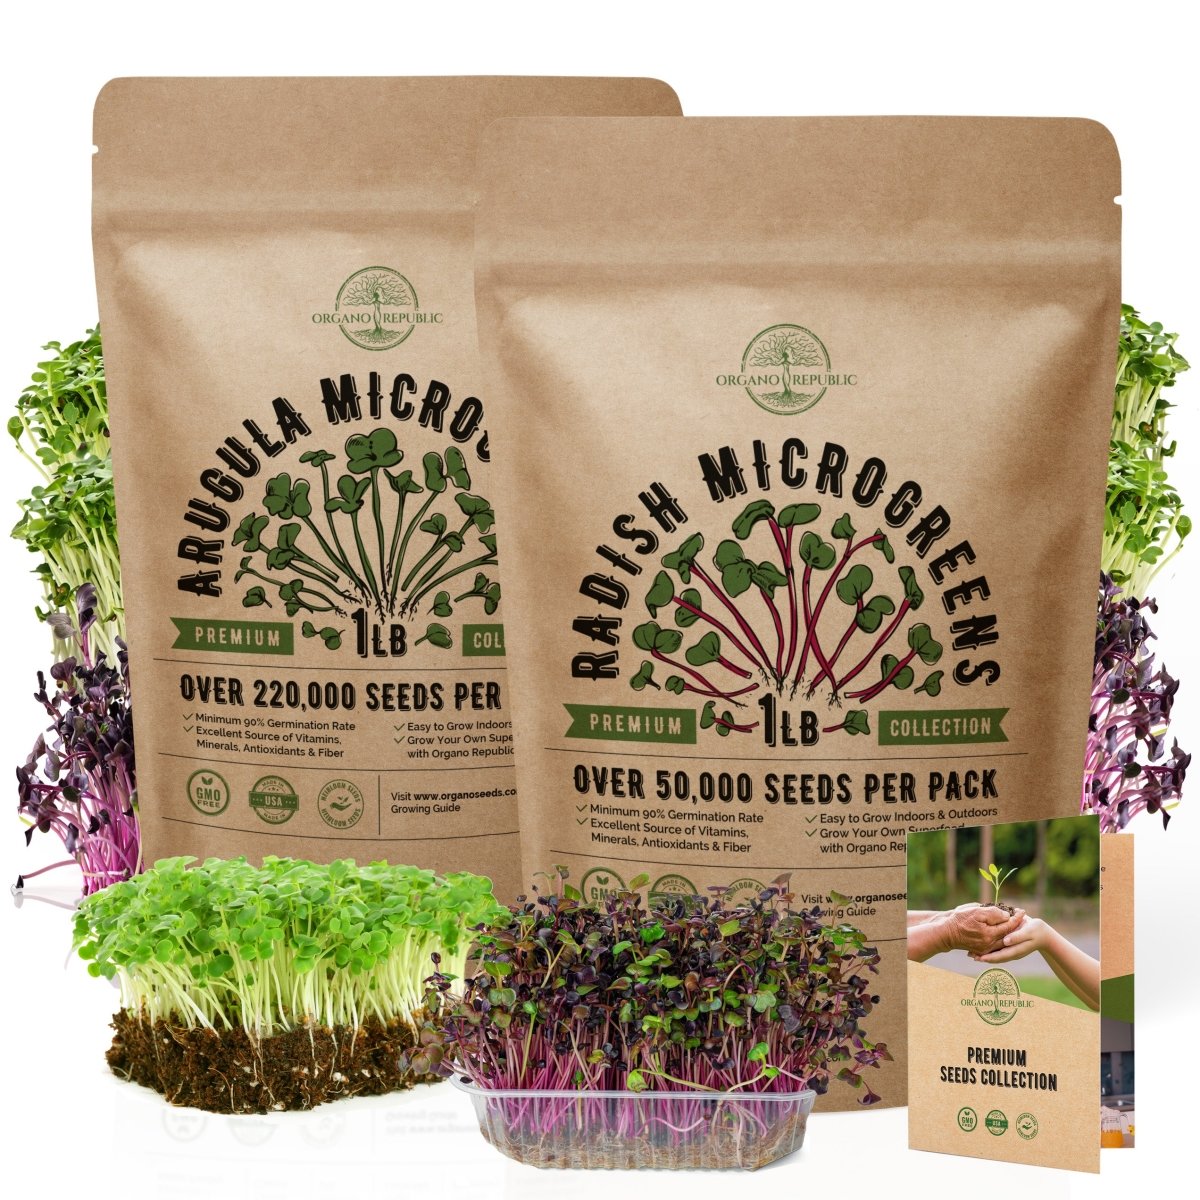 Arugula & Radish Microgreens Seeds Bundle Non-GMO Heirloom Seeds for Planting Indoor and Outdoor Over 270,000 Microgreen & Sprouting Seeds in One Value Bundle - Organo Republic